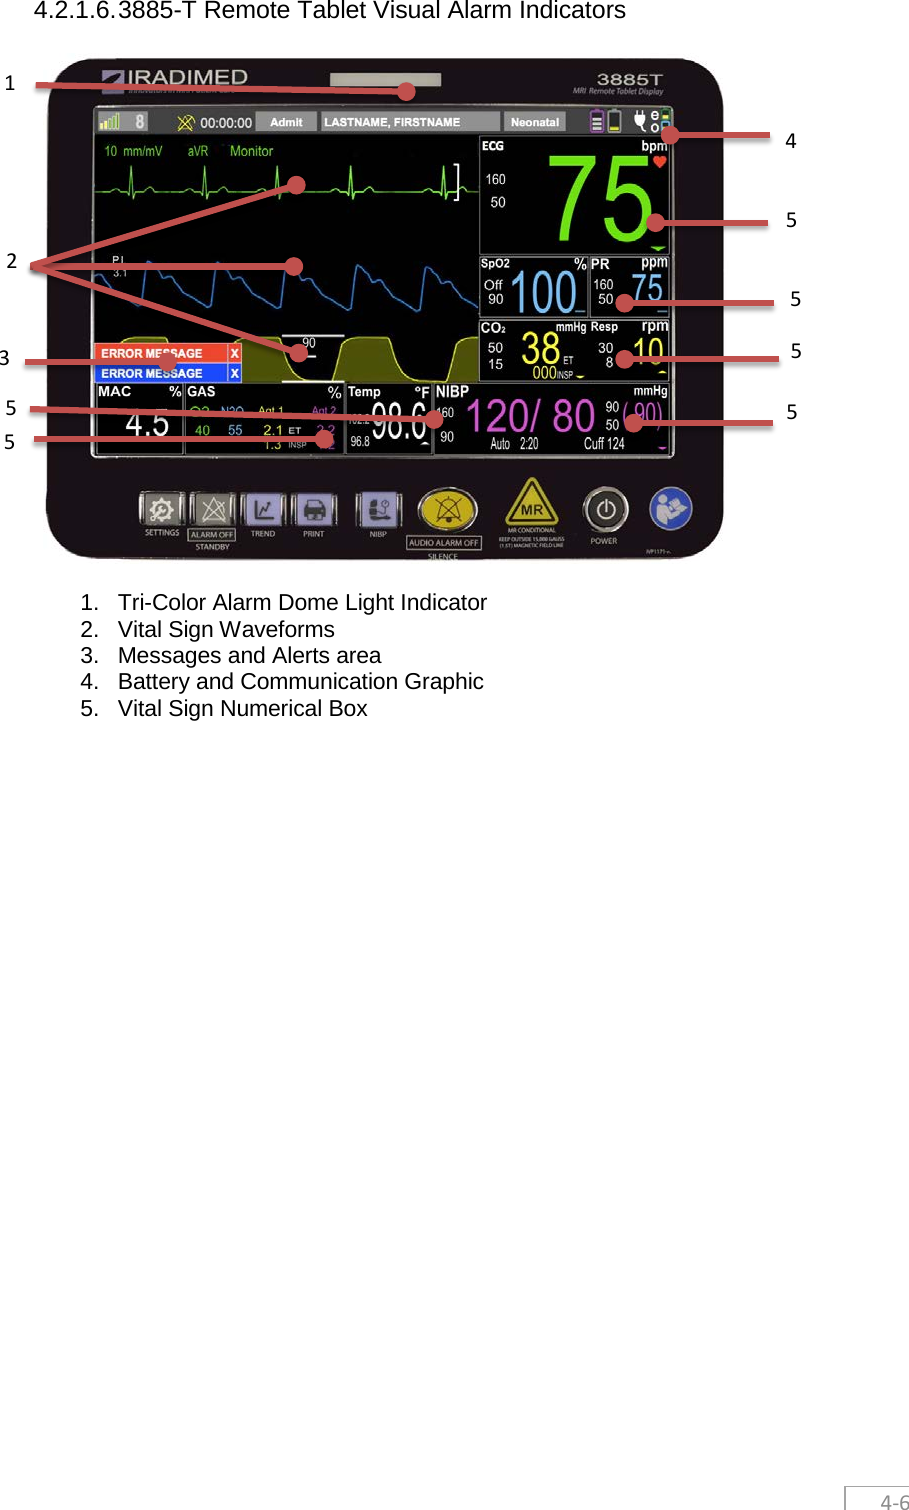  4-6 4.2.1.6. 3885-T Remote Tablet Visual Alarm Indicators   1. Tri-Color Alarm Dome Light Indicator 2. Vital Sign Waveforms 3. Messages and Alerts area 4. Battery and Communication Graphic 5. Vital Sign Numerical Box    4 1 5 2 3 5 5 5 5 5 